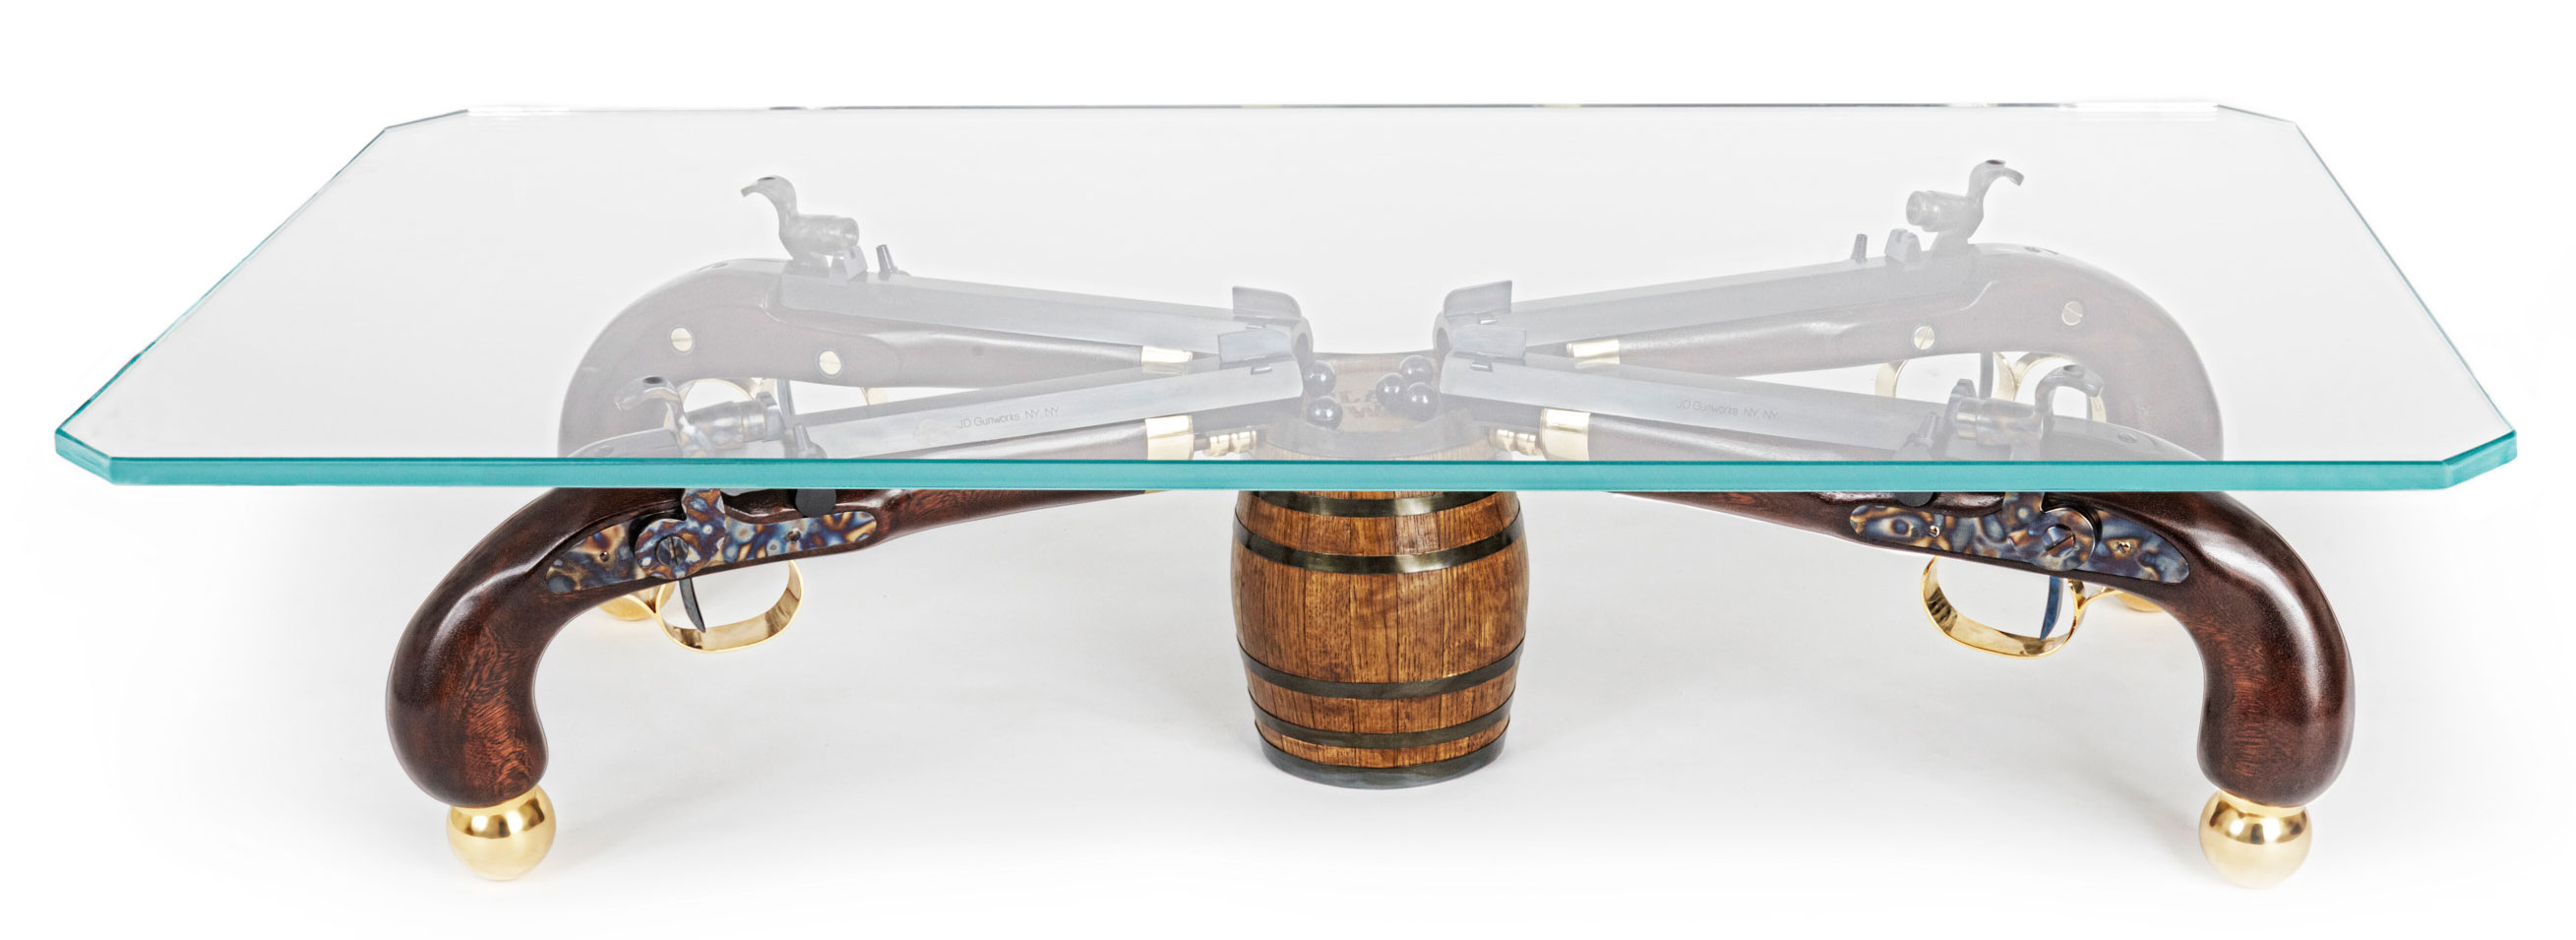 Innovative furniture and game table designs